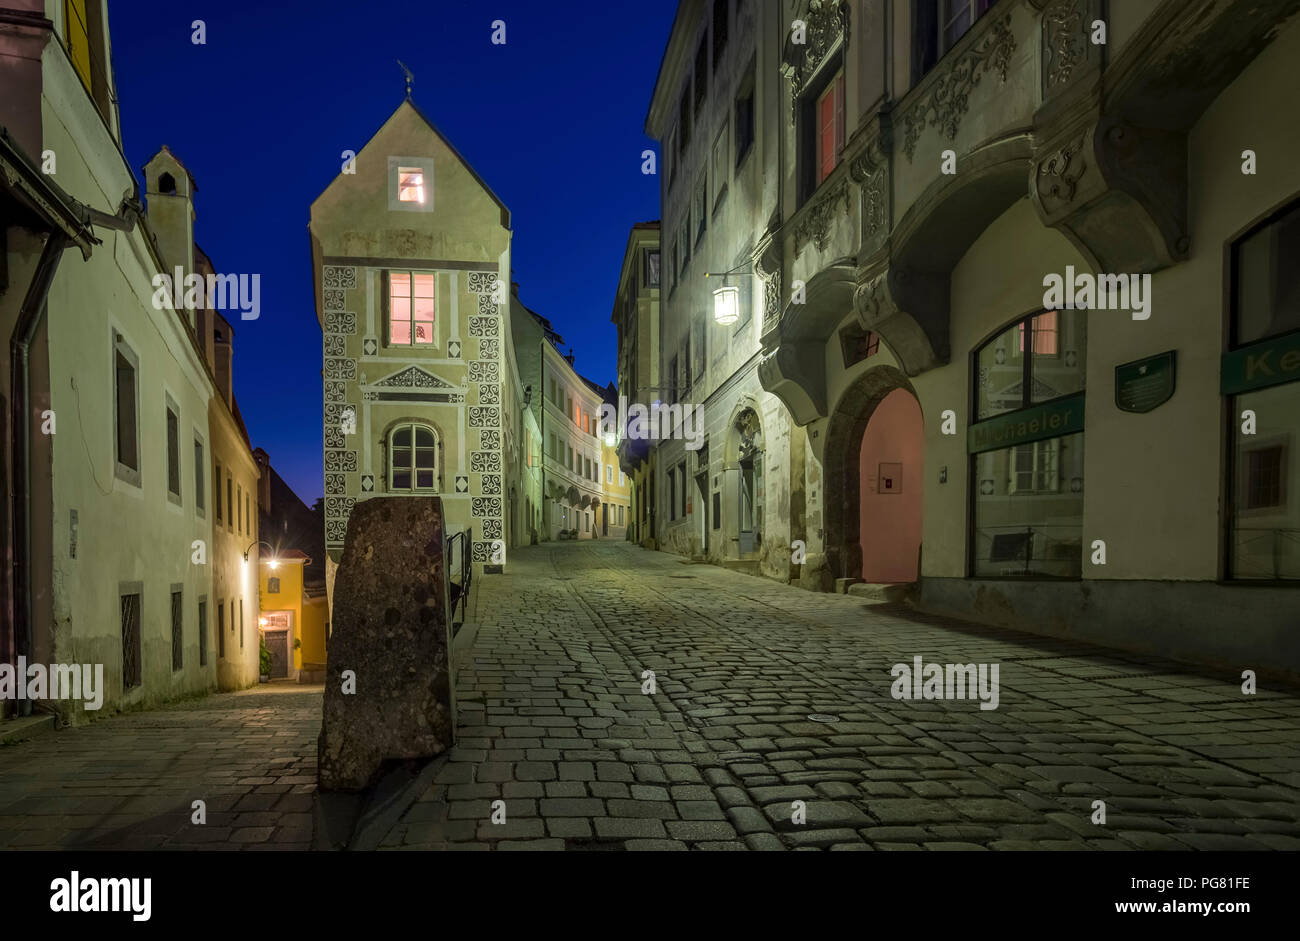 Austria, Upper Austria, Steyr, guild house in the town at night Stock Photo